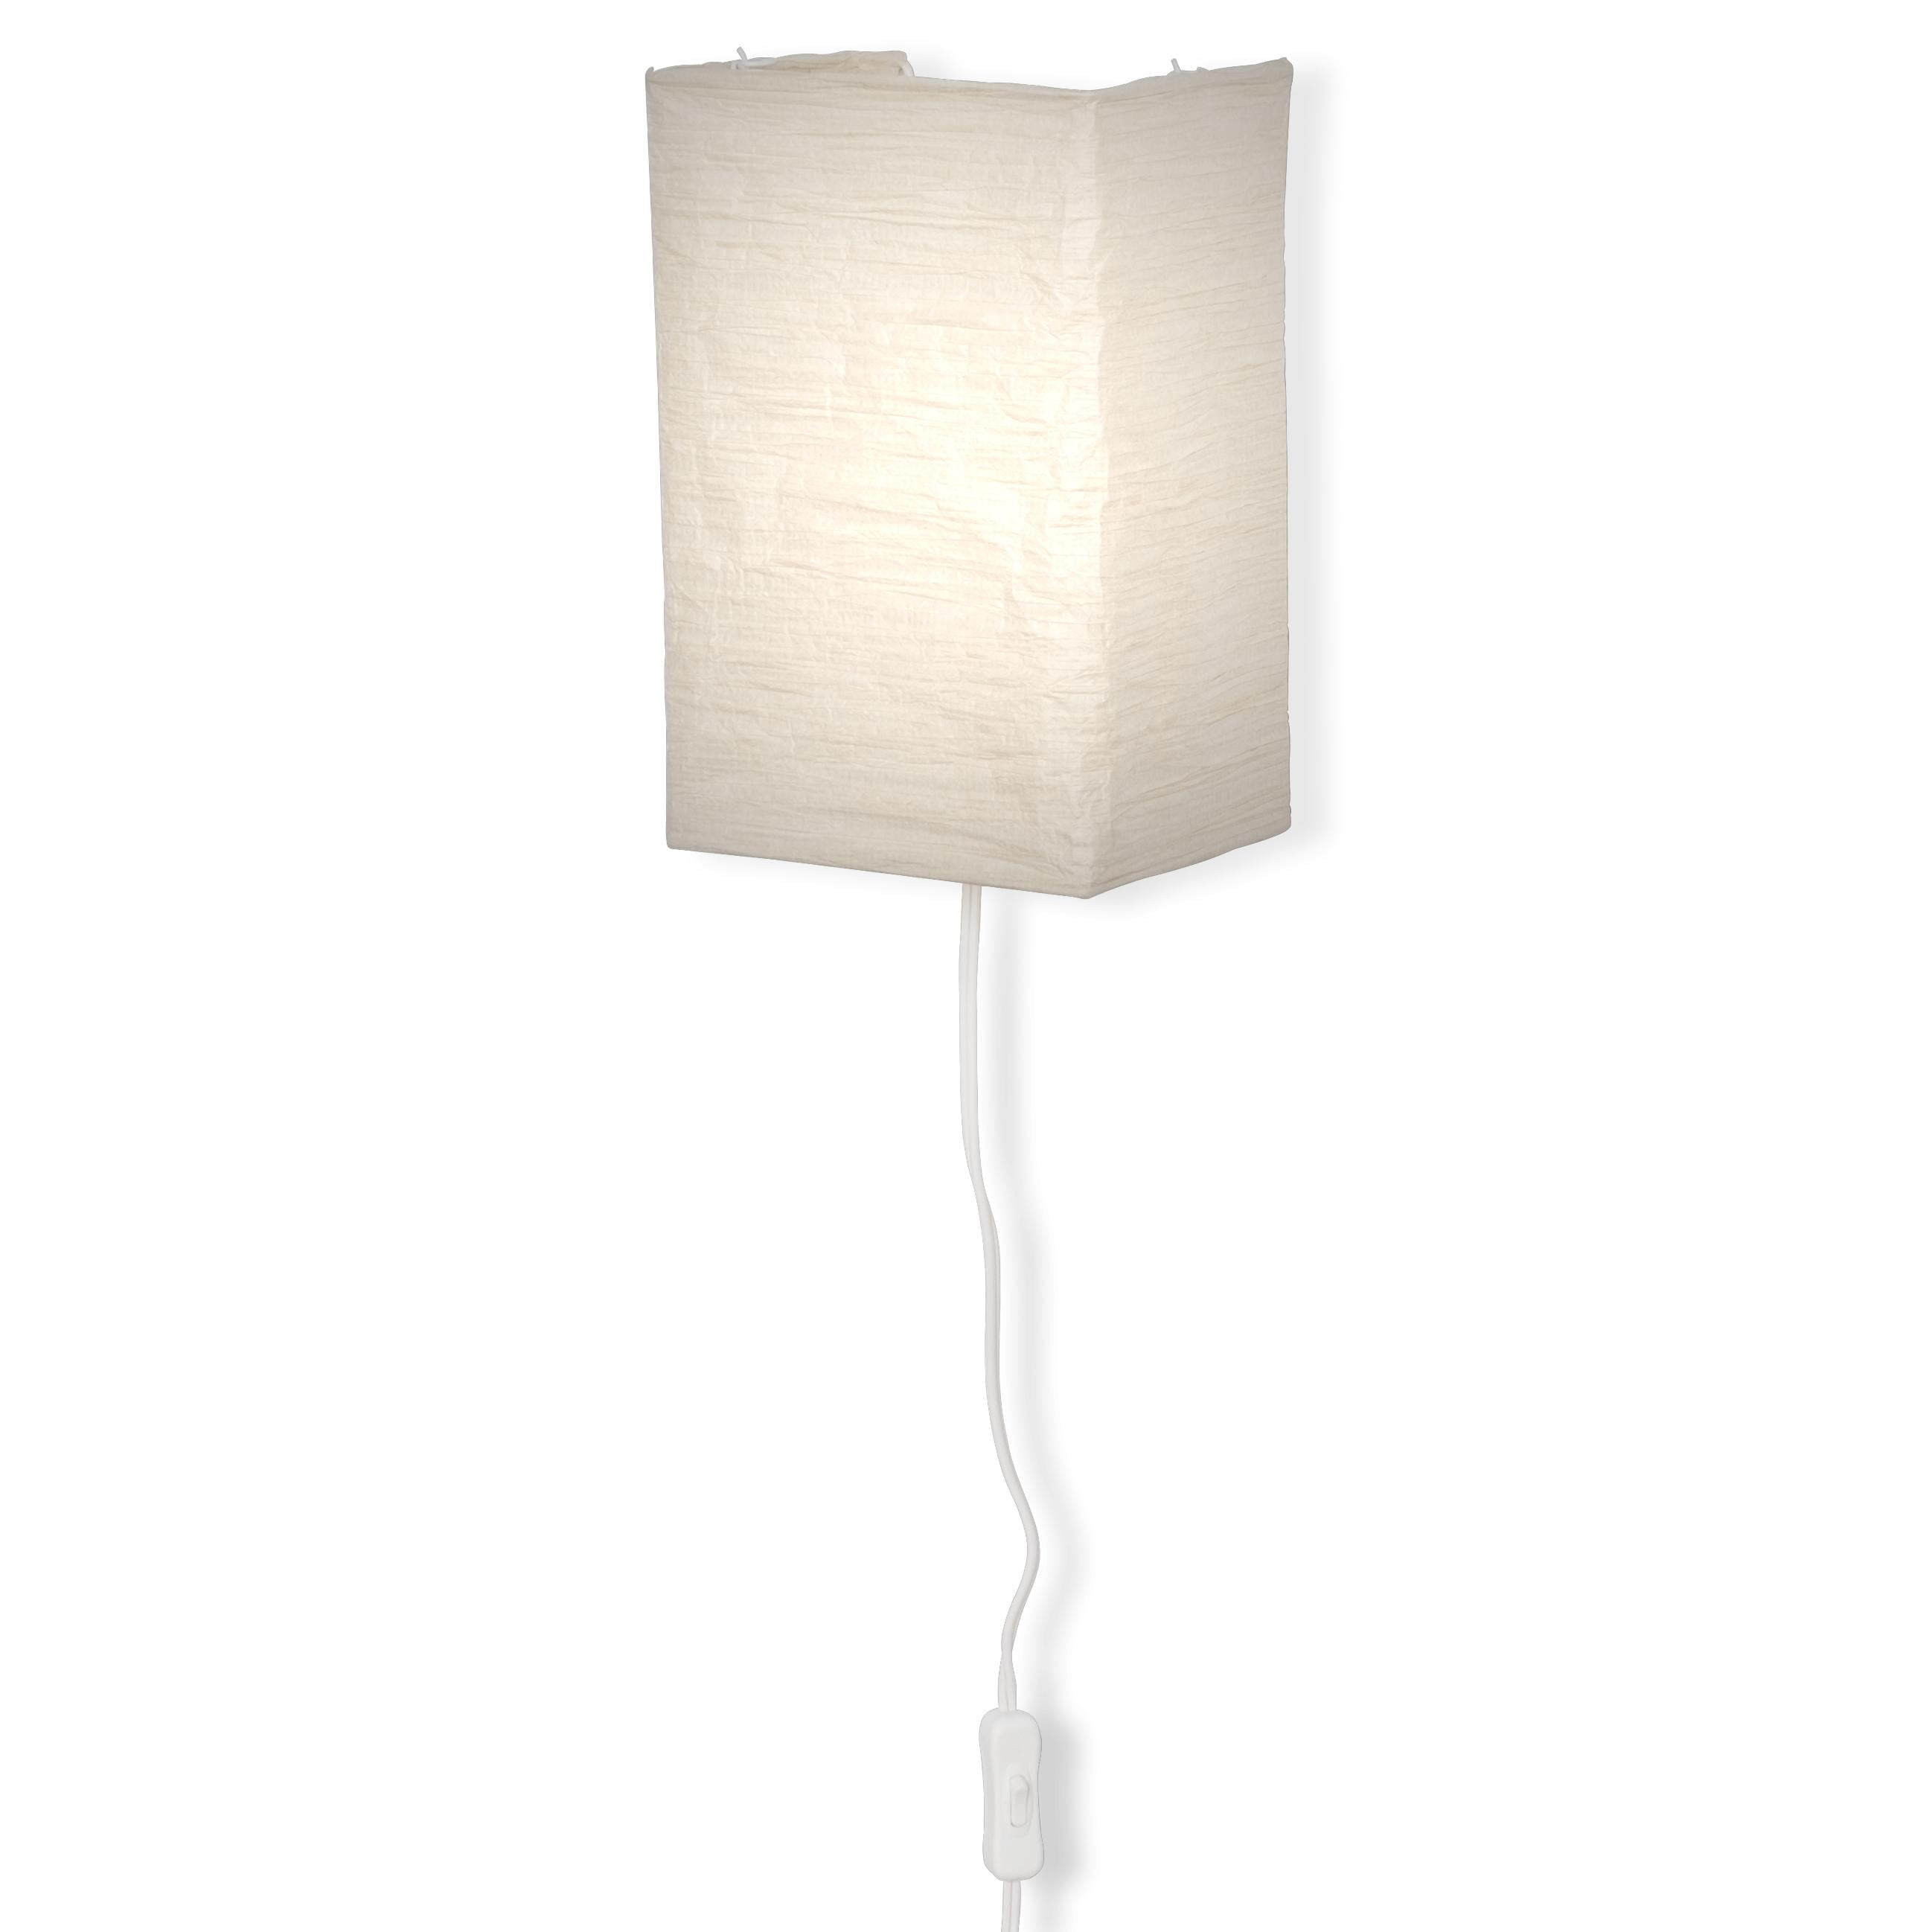 Large White Plug-In Wall Lamp,Wall Light Sconce 